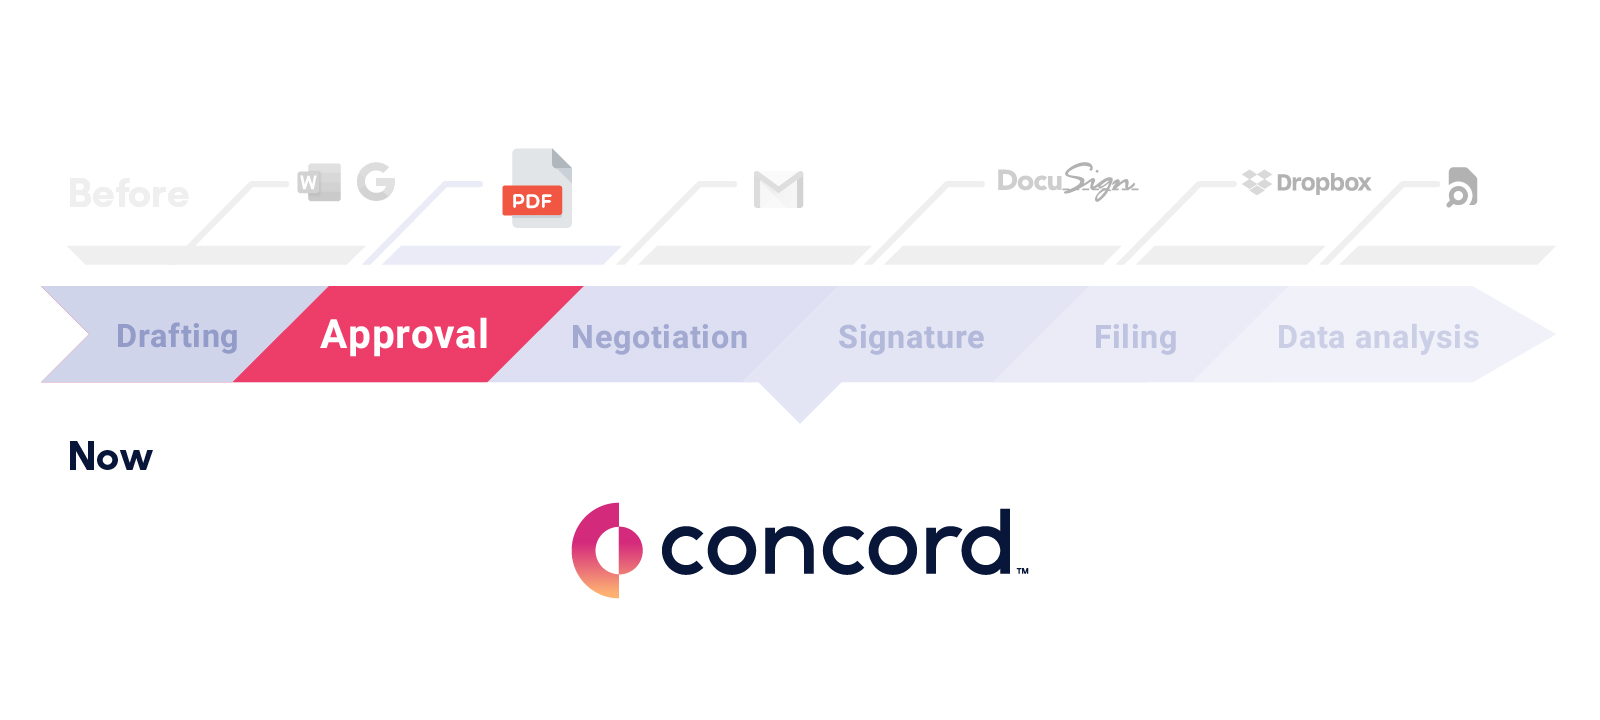 The second stage of the contract lifecycle is getting internal approval.